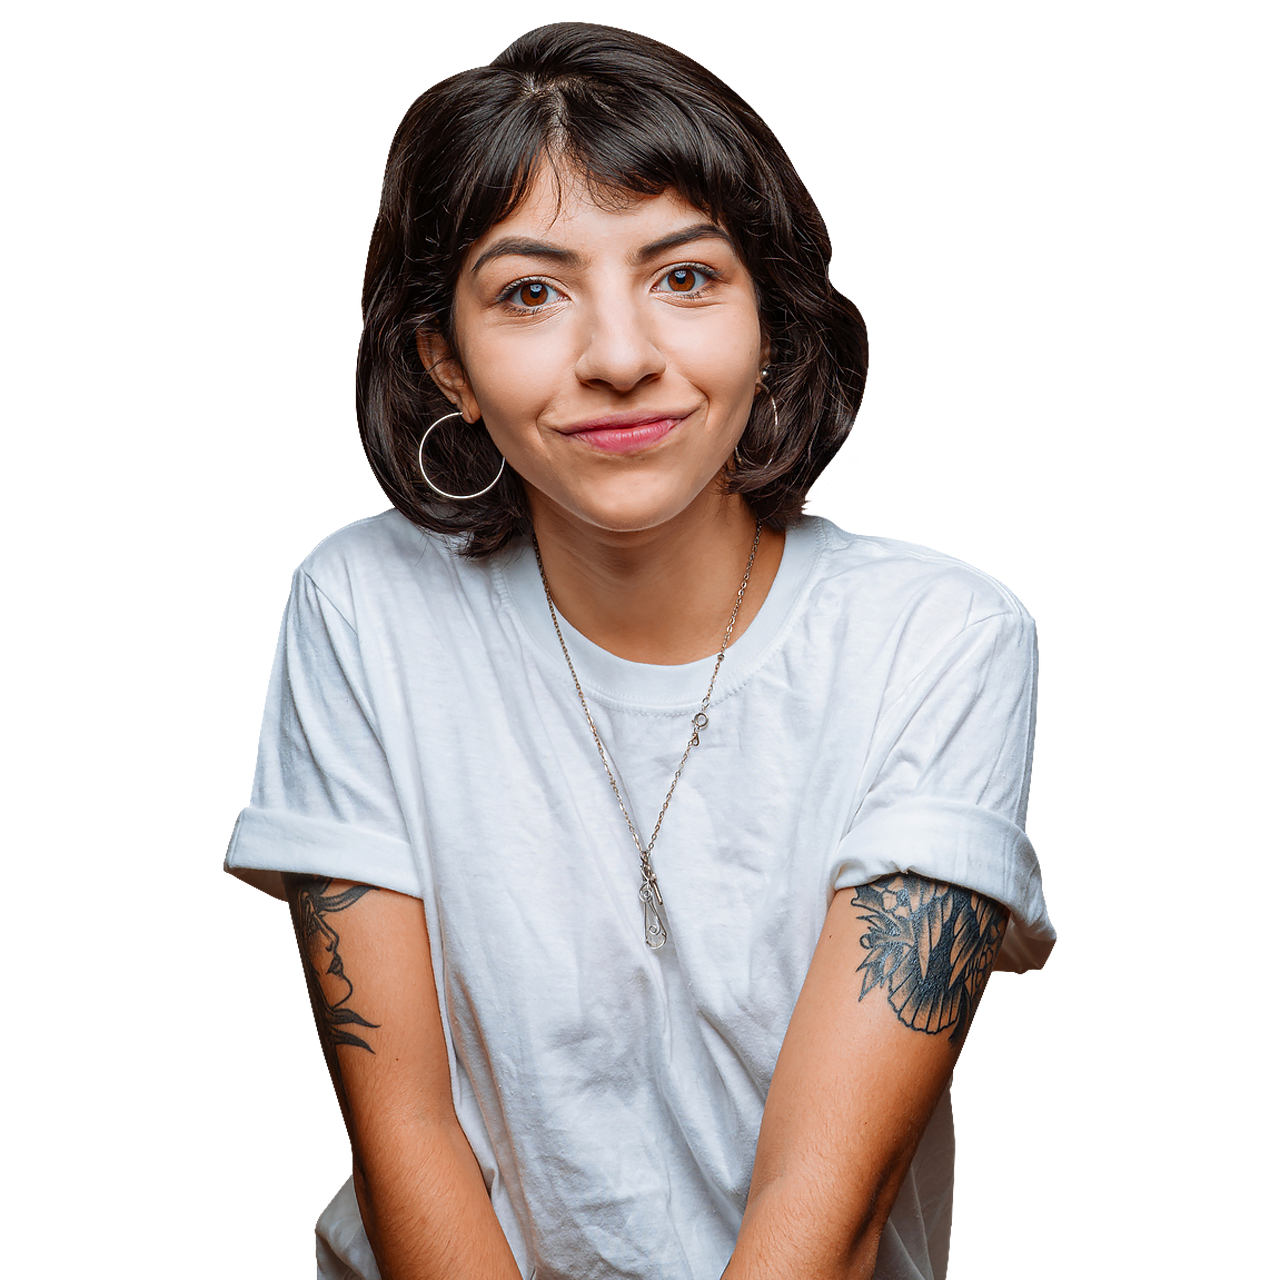 Woman wearing white shirt with tattoos on arms looking at the camera